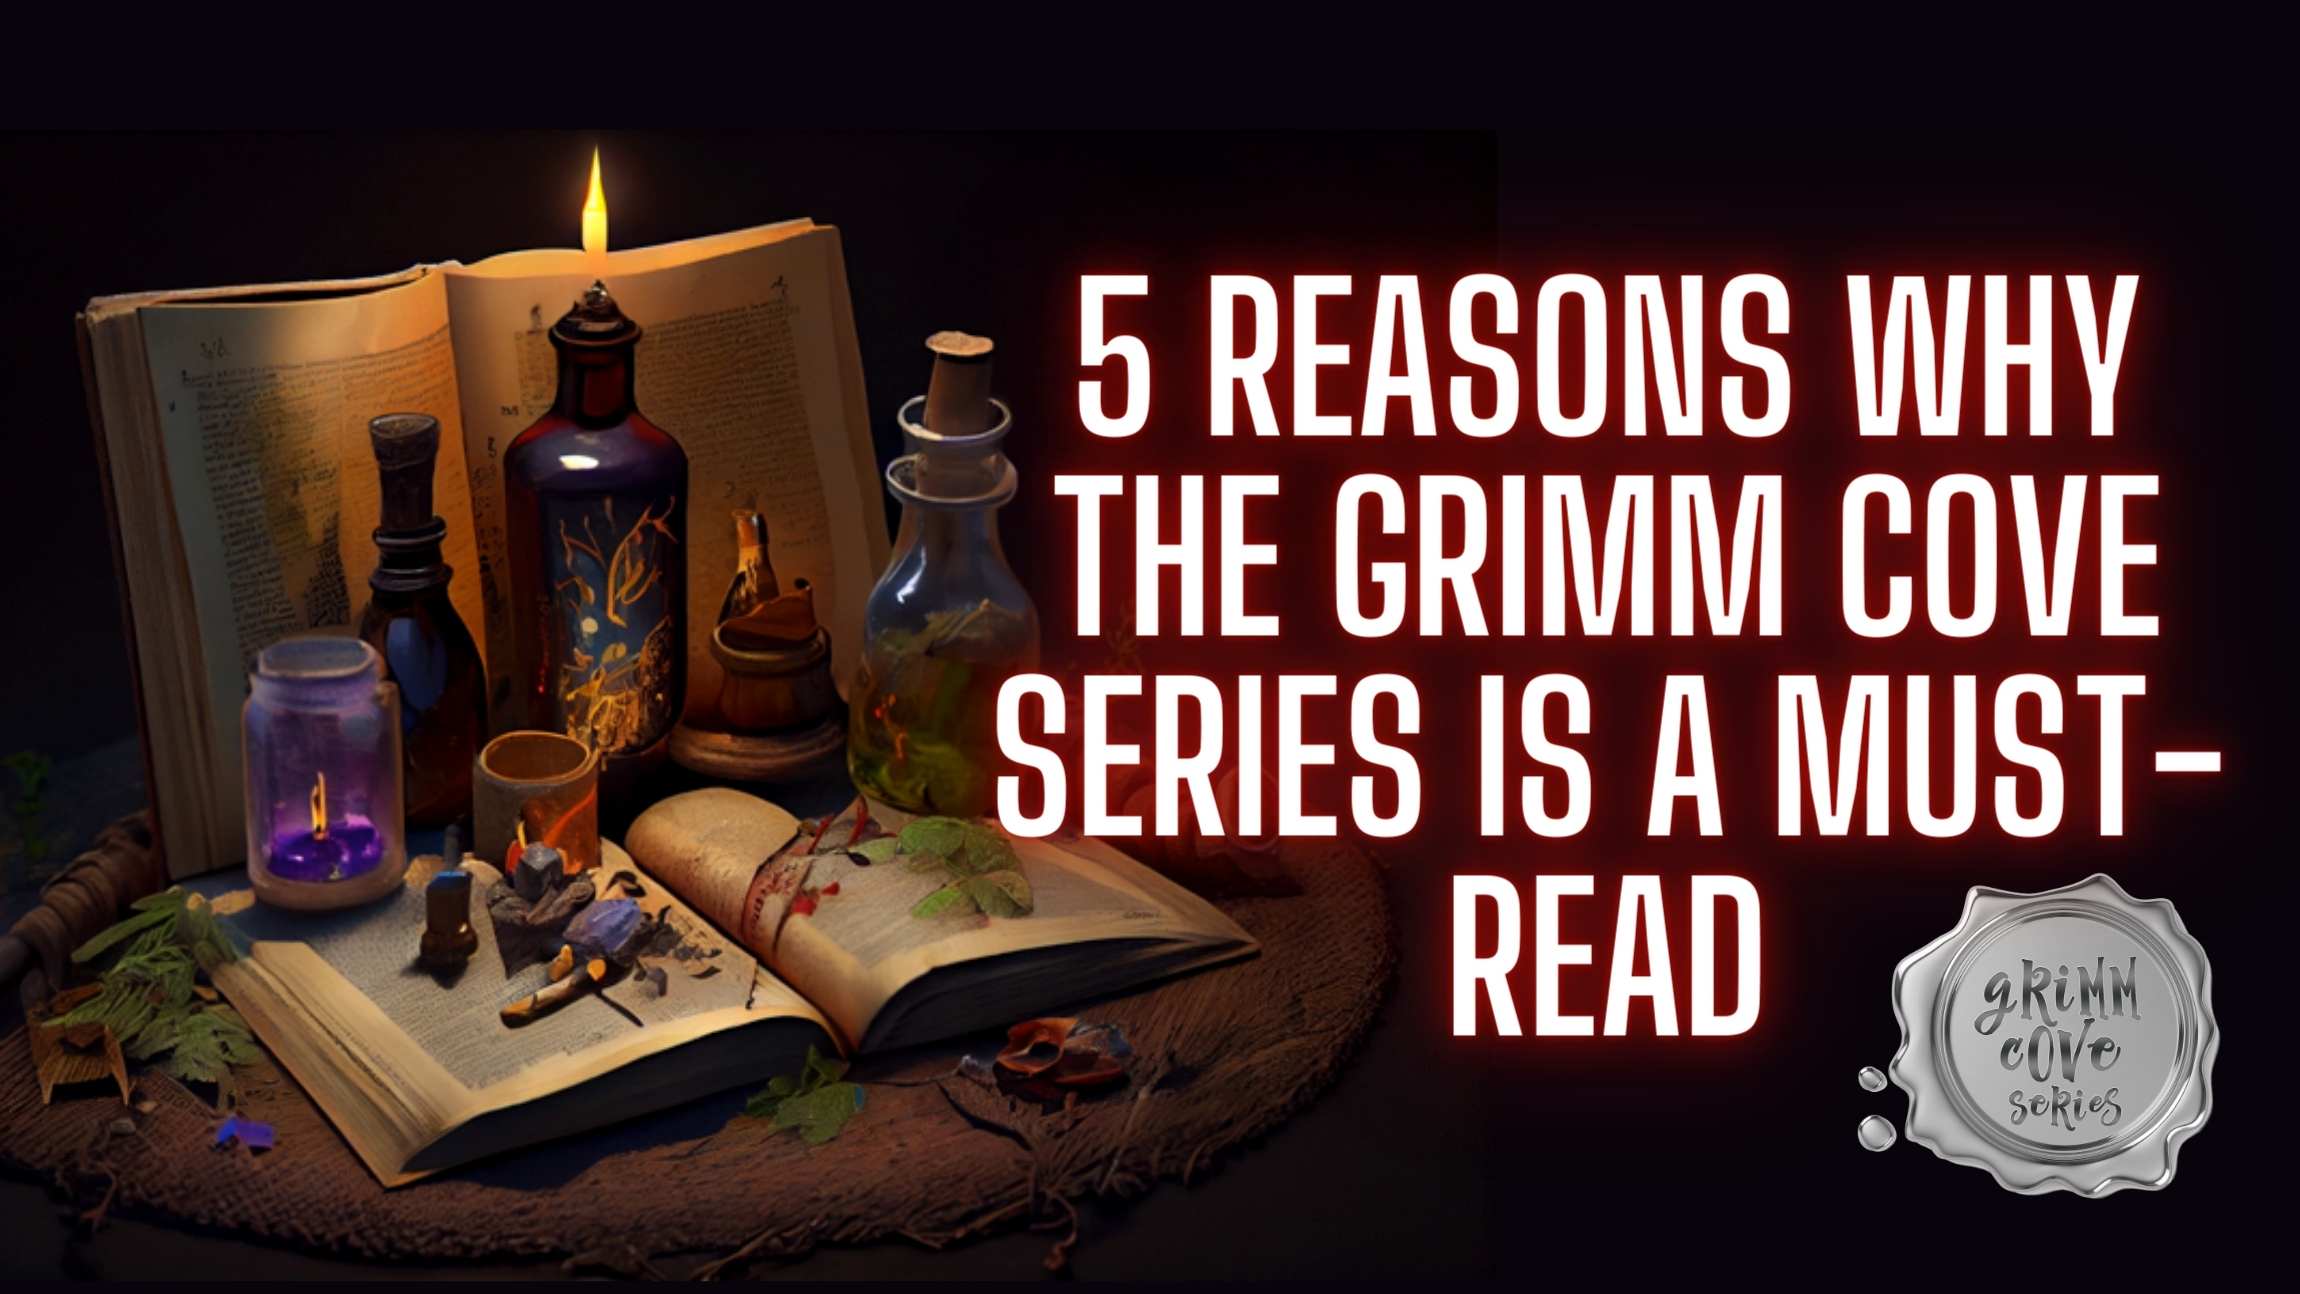 5 Reasons Why The Grimm Cove Series is A Must-Read